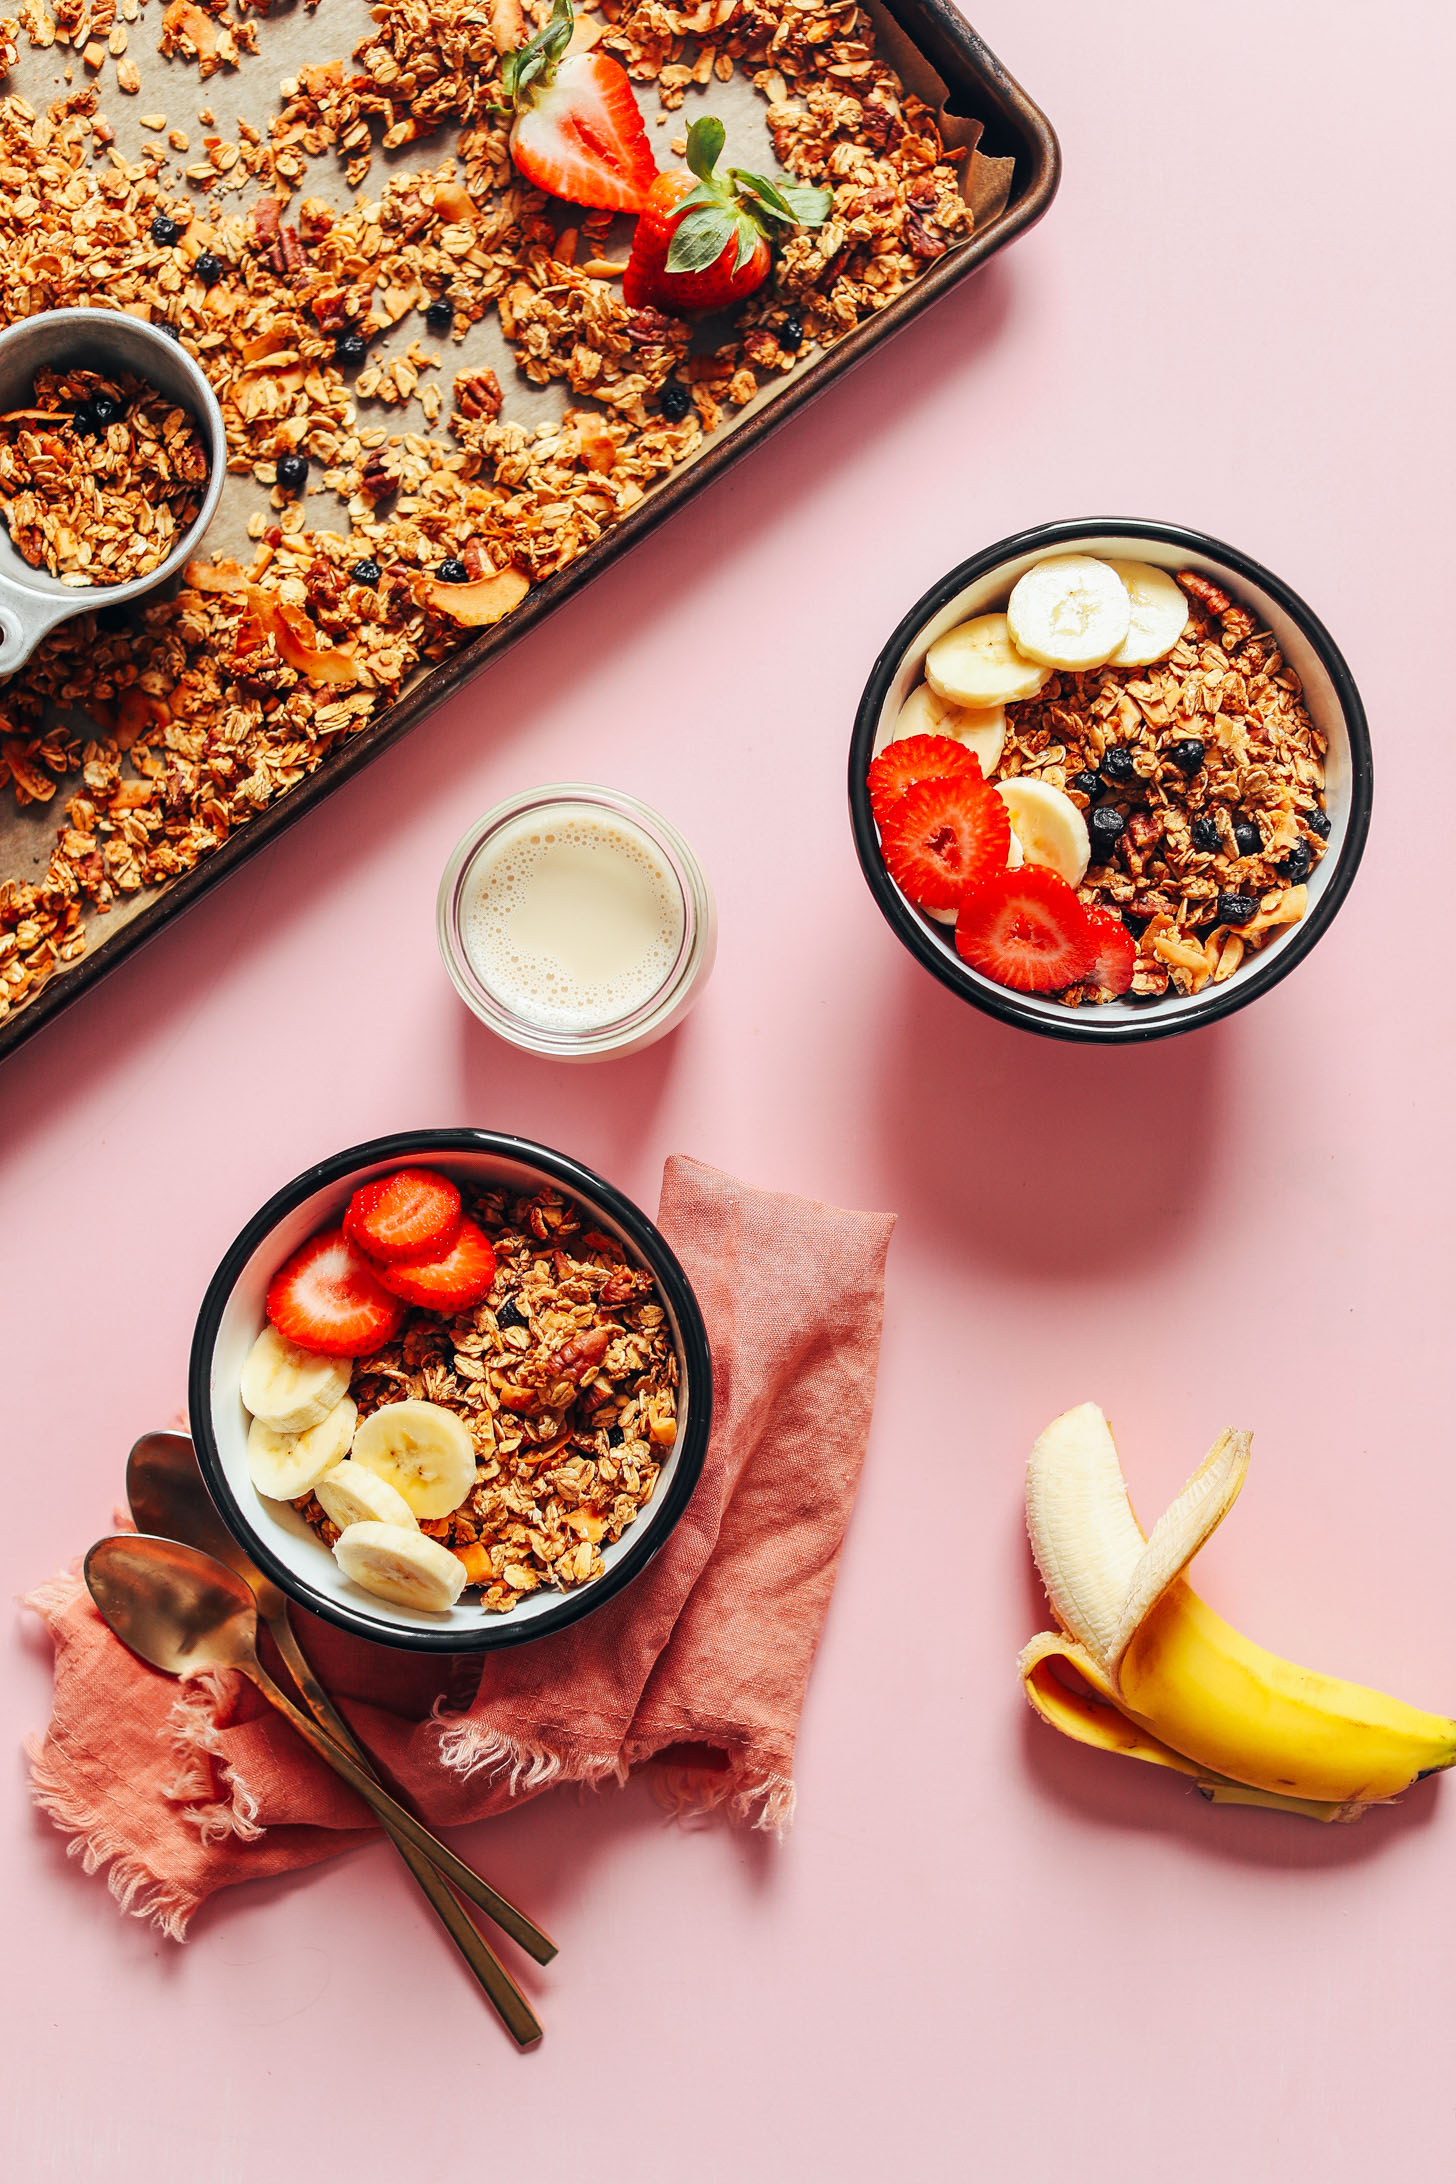 Two bowls of gluten-free homemade granola and dairy-free milk topped with fresh fruit